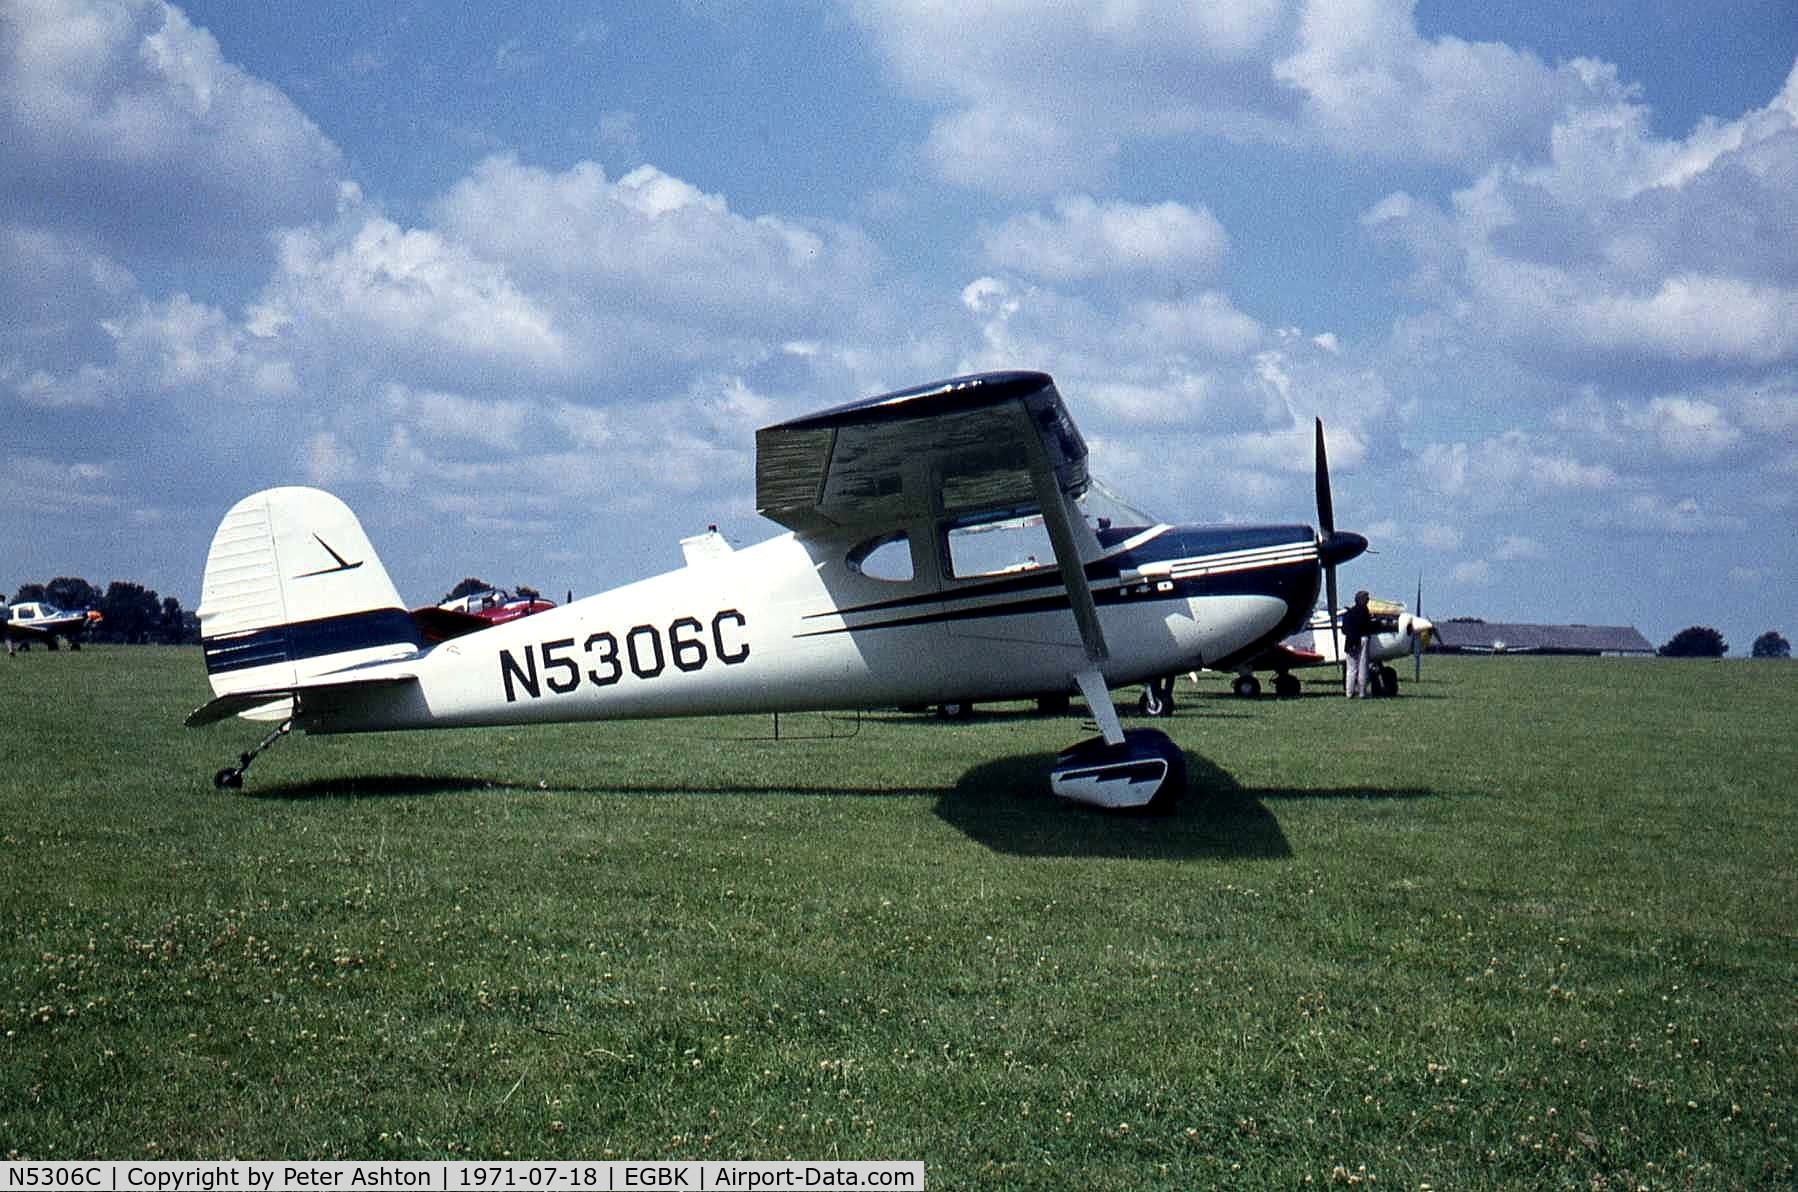 N5306C, 1950 Cessna 140A C/N 15426, PFA Rally 1971 (Cessna 140 according to my notes)